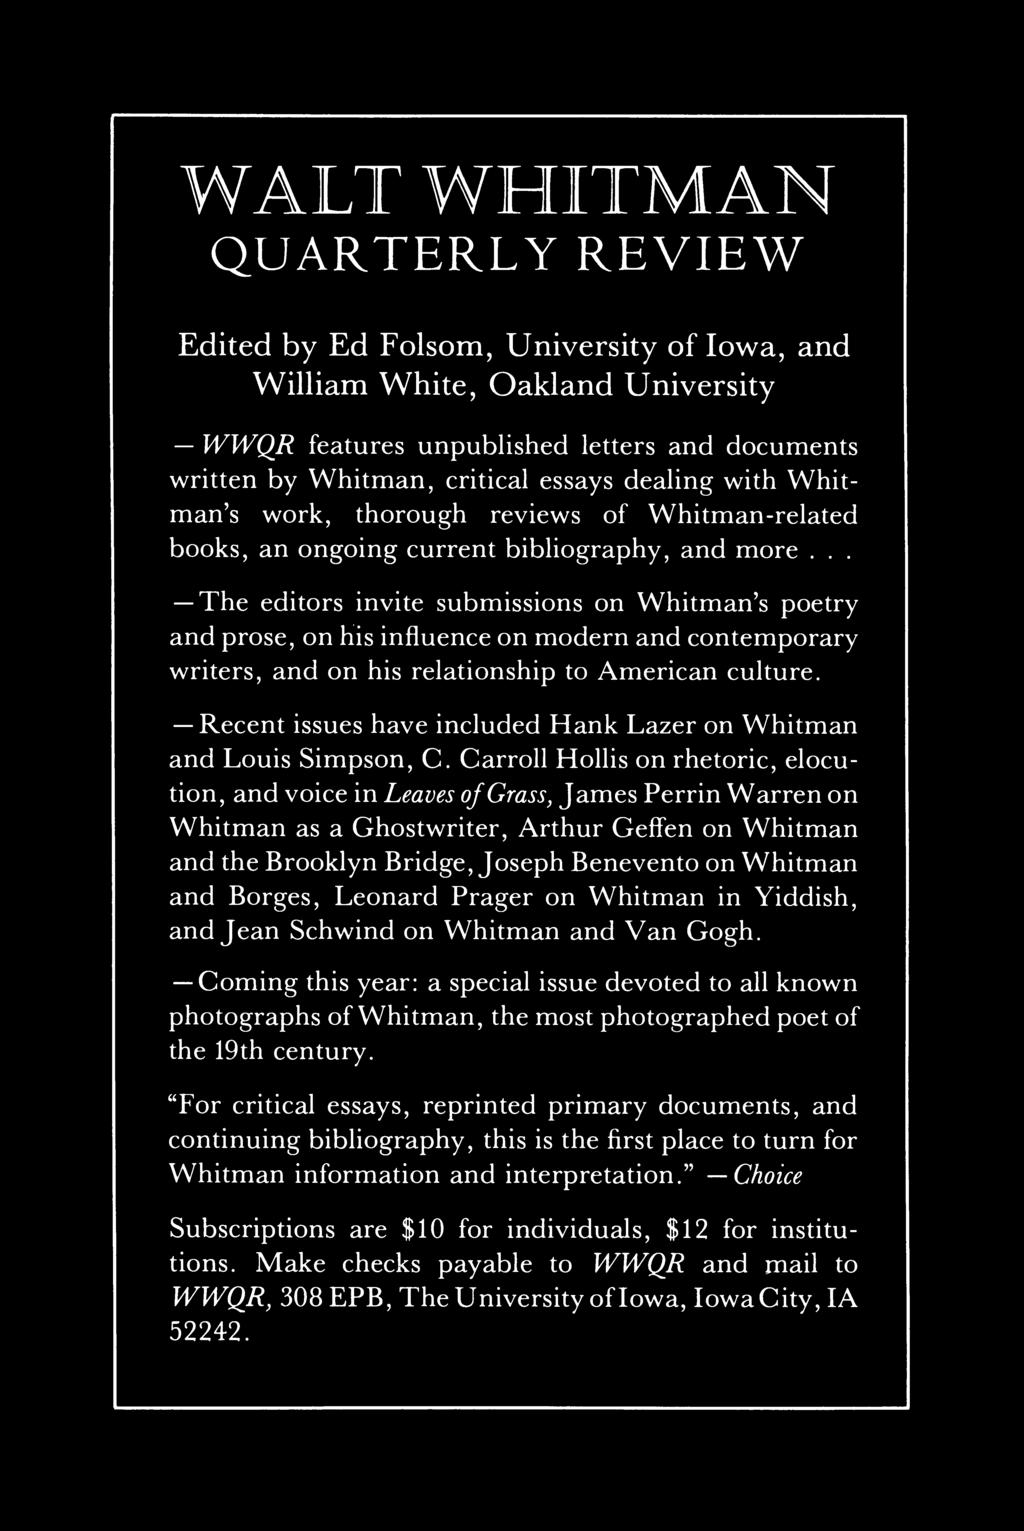 .. The editors invite submissions on W hitman s poetry and prose, on his influence on modern and contemporary writers, and on his relationship to American culture.